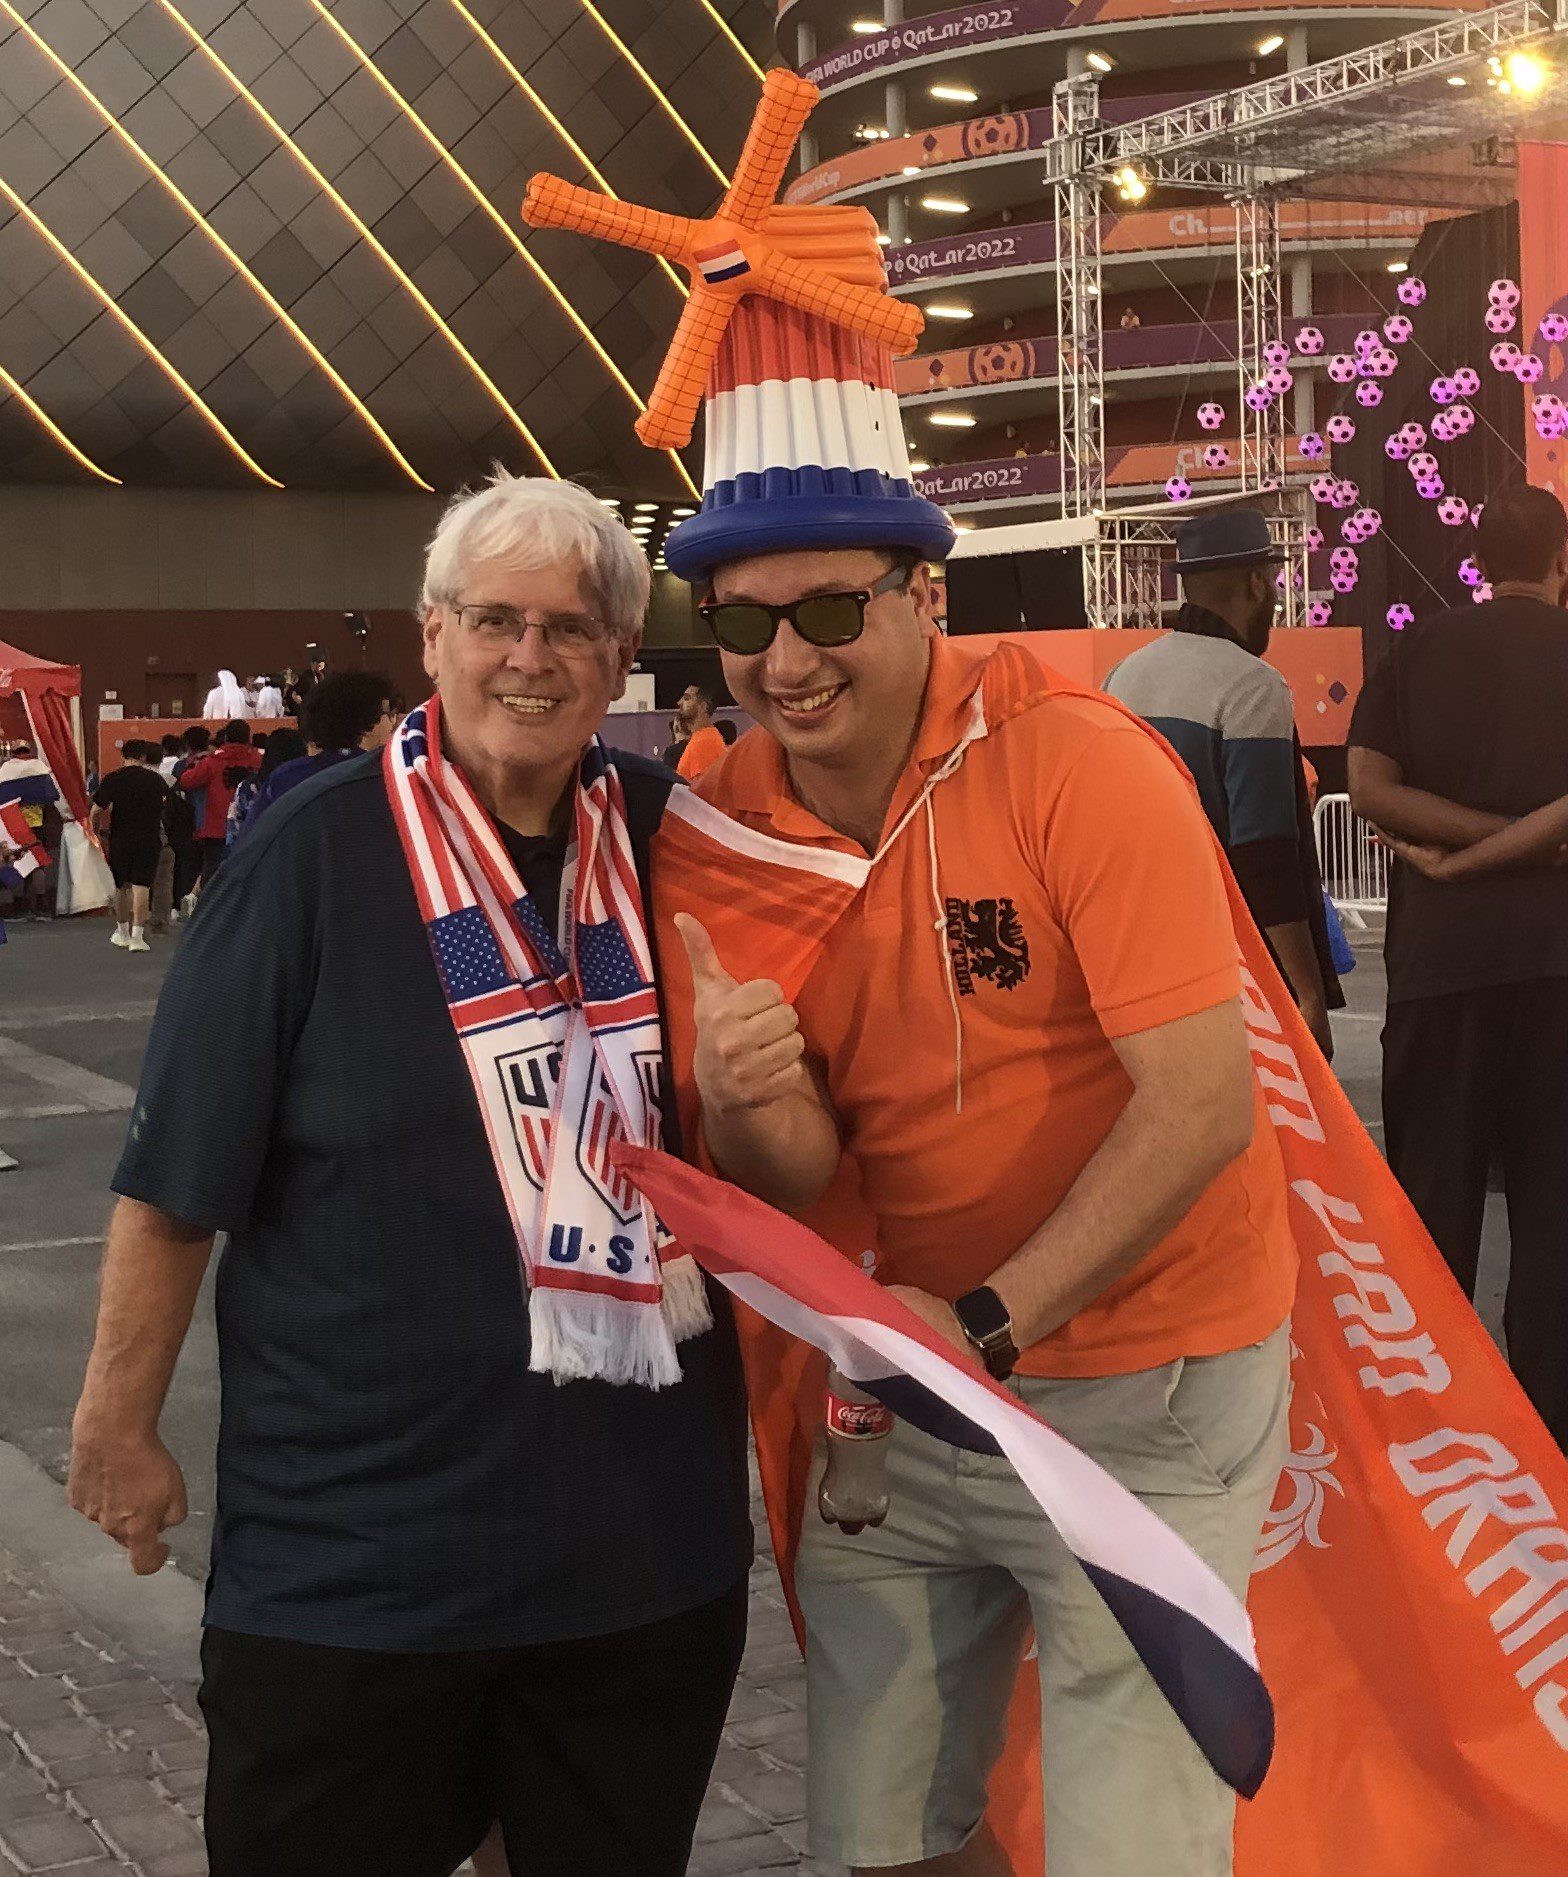 Hal and a Netherlands fan, who is dressed with an orange cape and windmill, pose for a photo outside the stadium